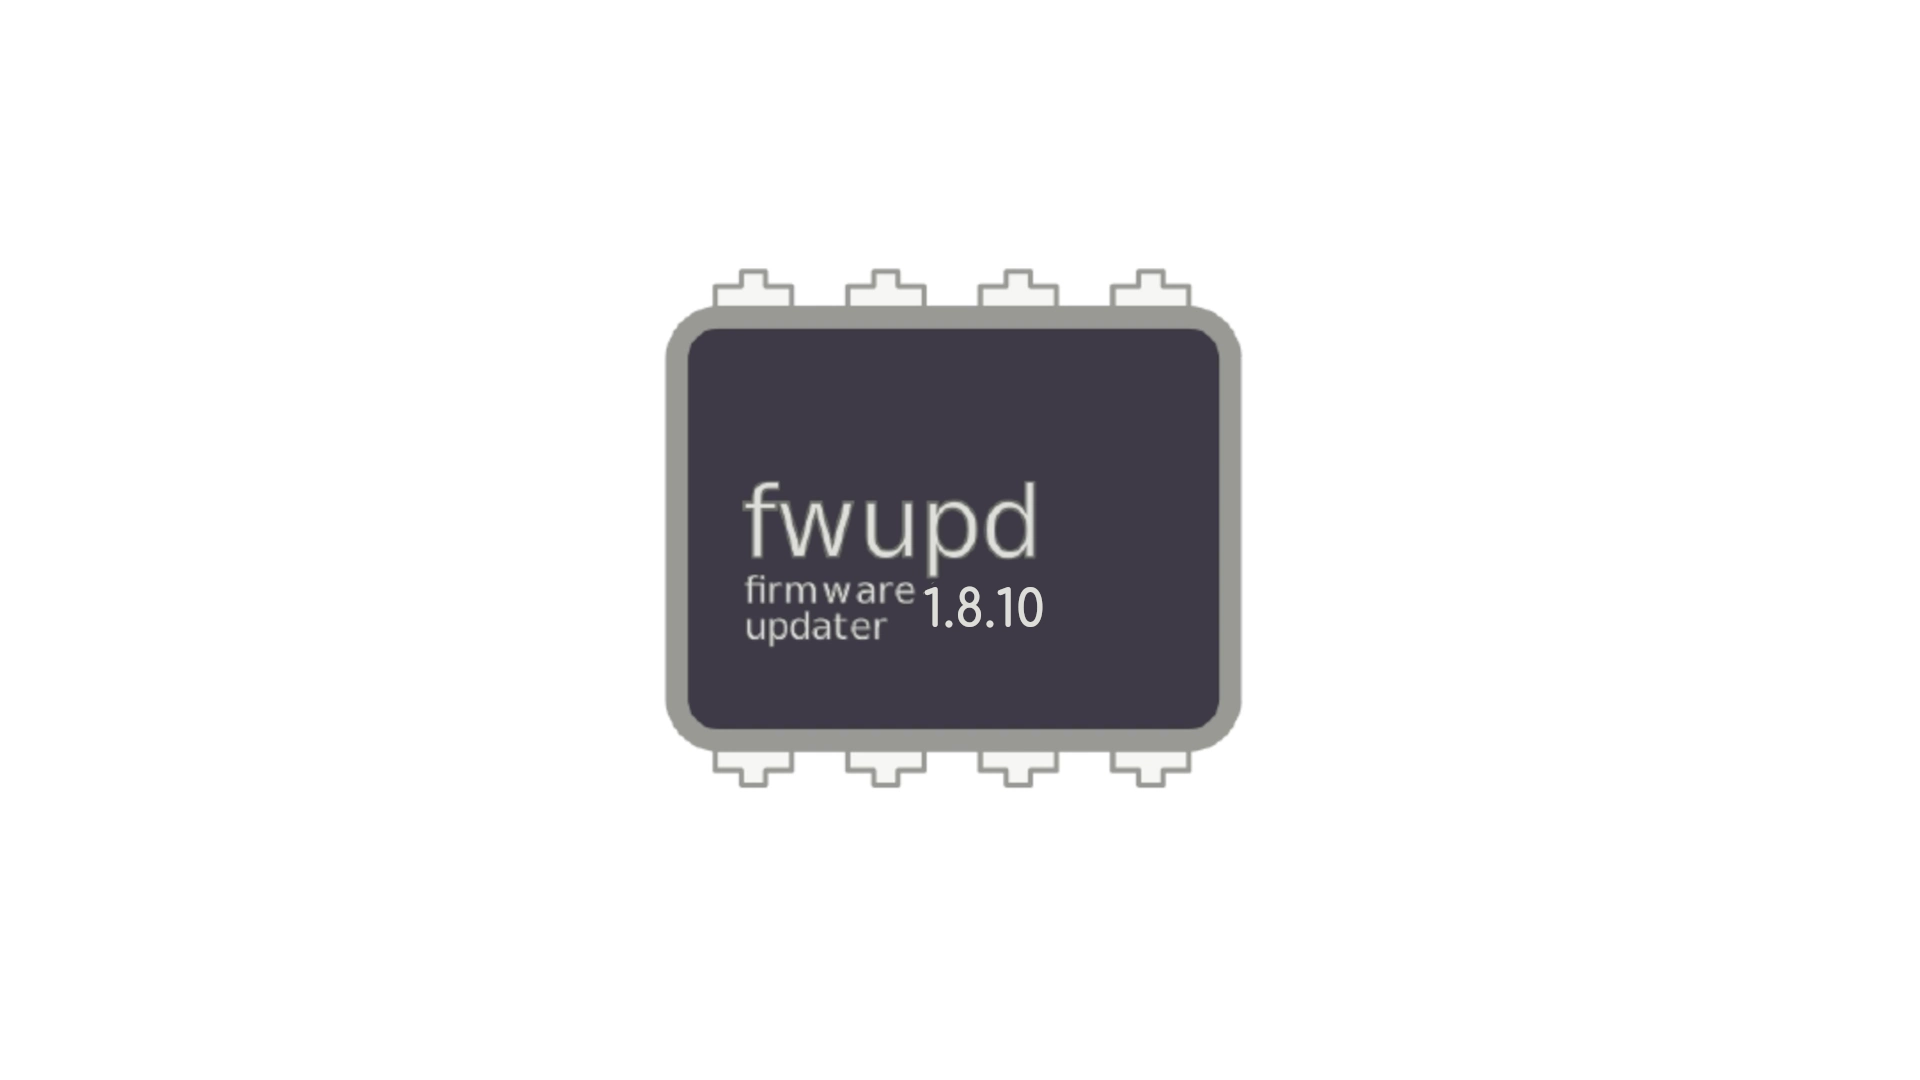 Fwupd 1.8.10 Adds Support for StarBook Mk VI Laptop, System76’s Launch Heavy Keyboard